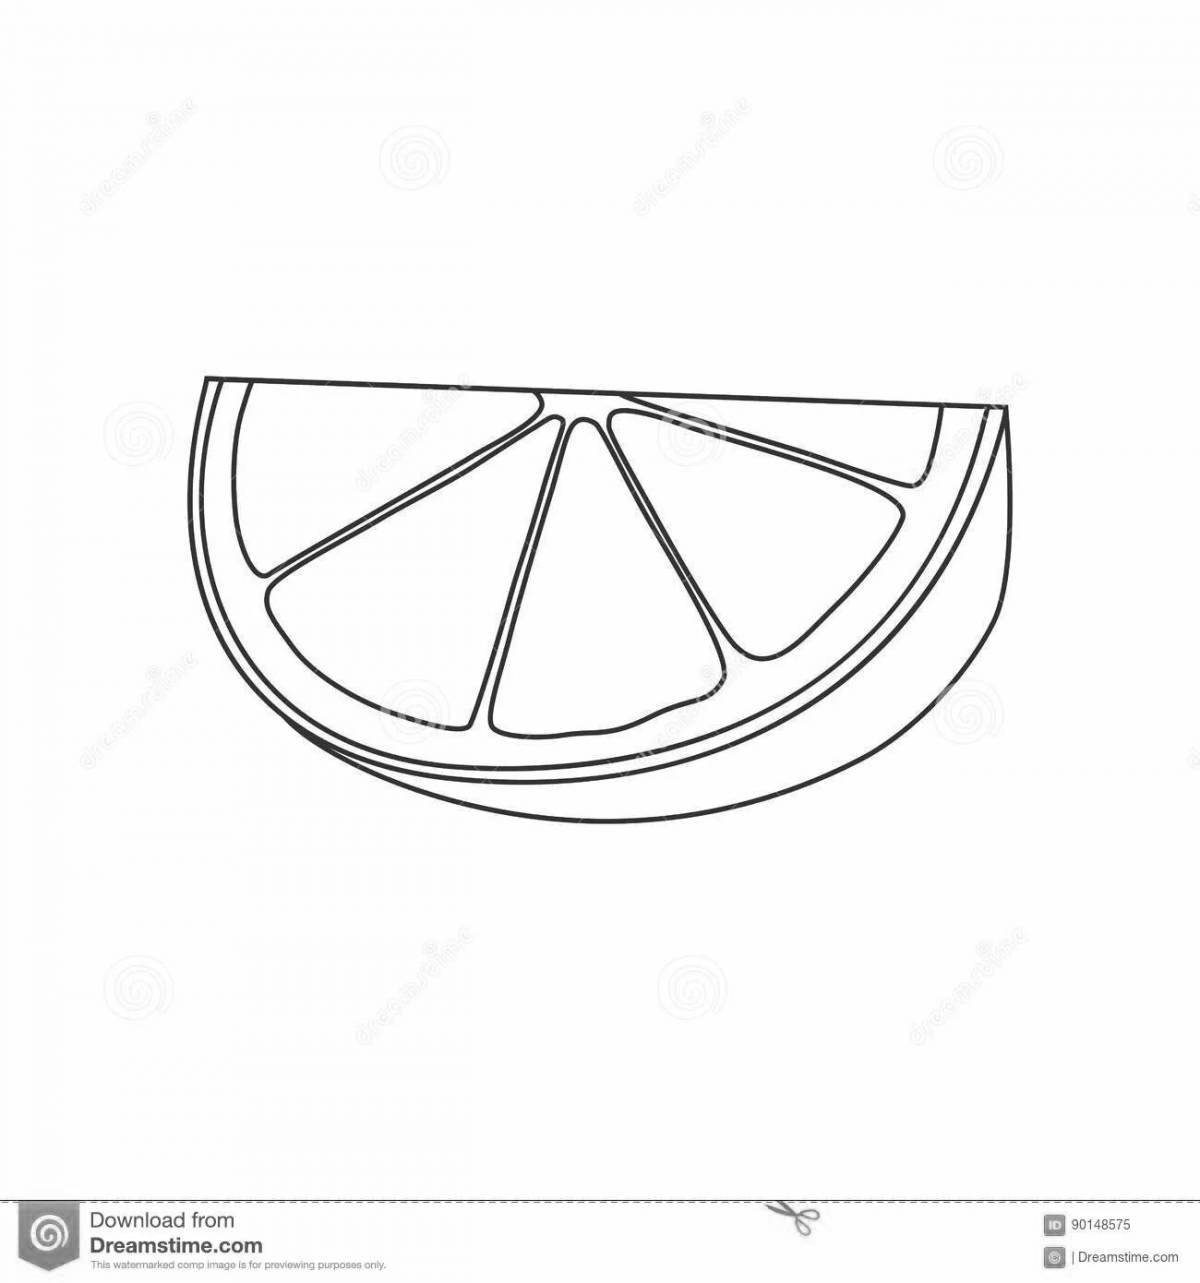 Animated orange slice coloring page